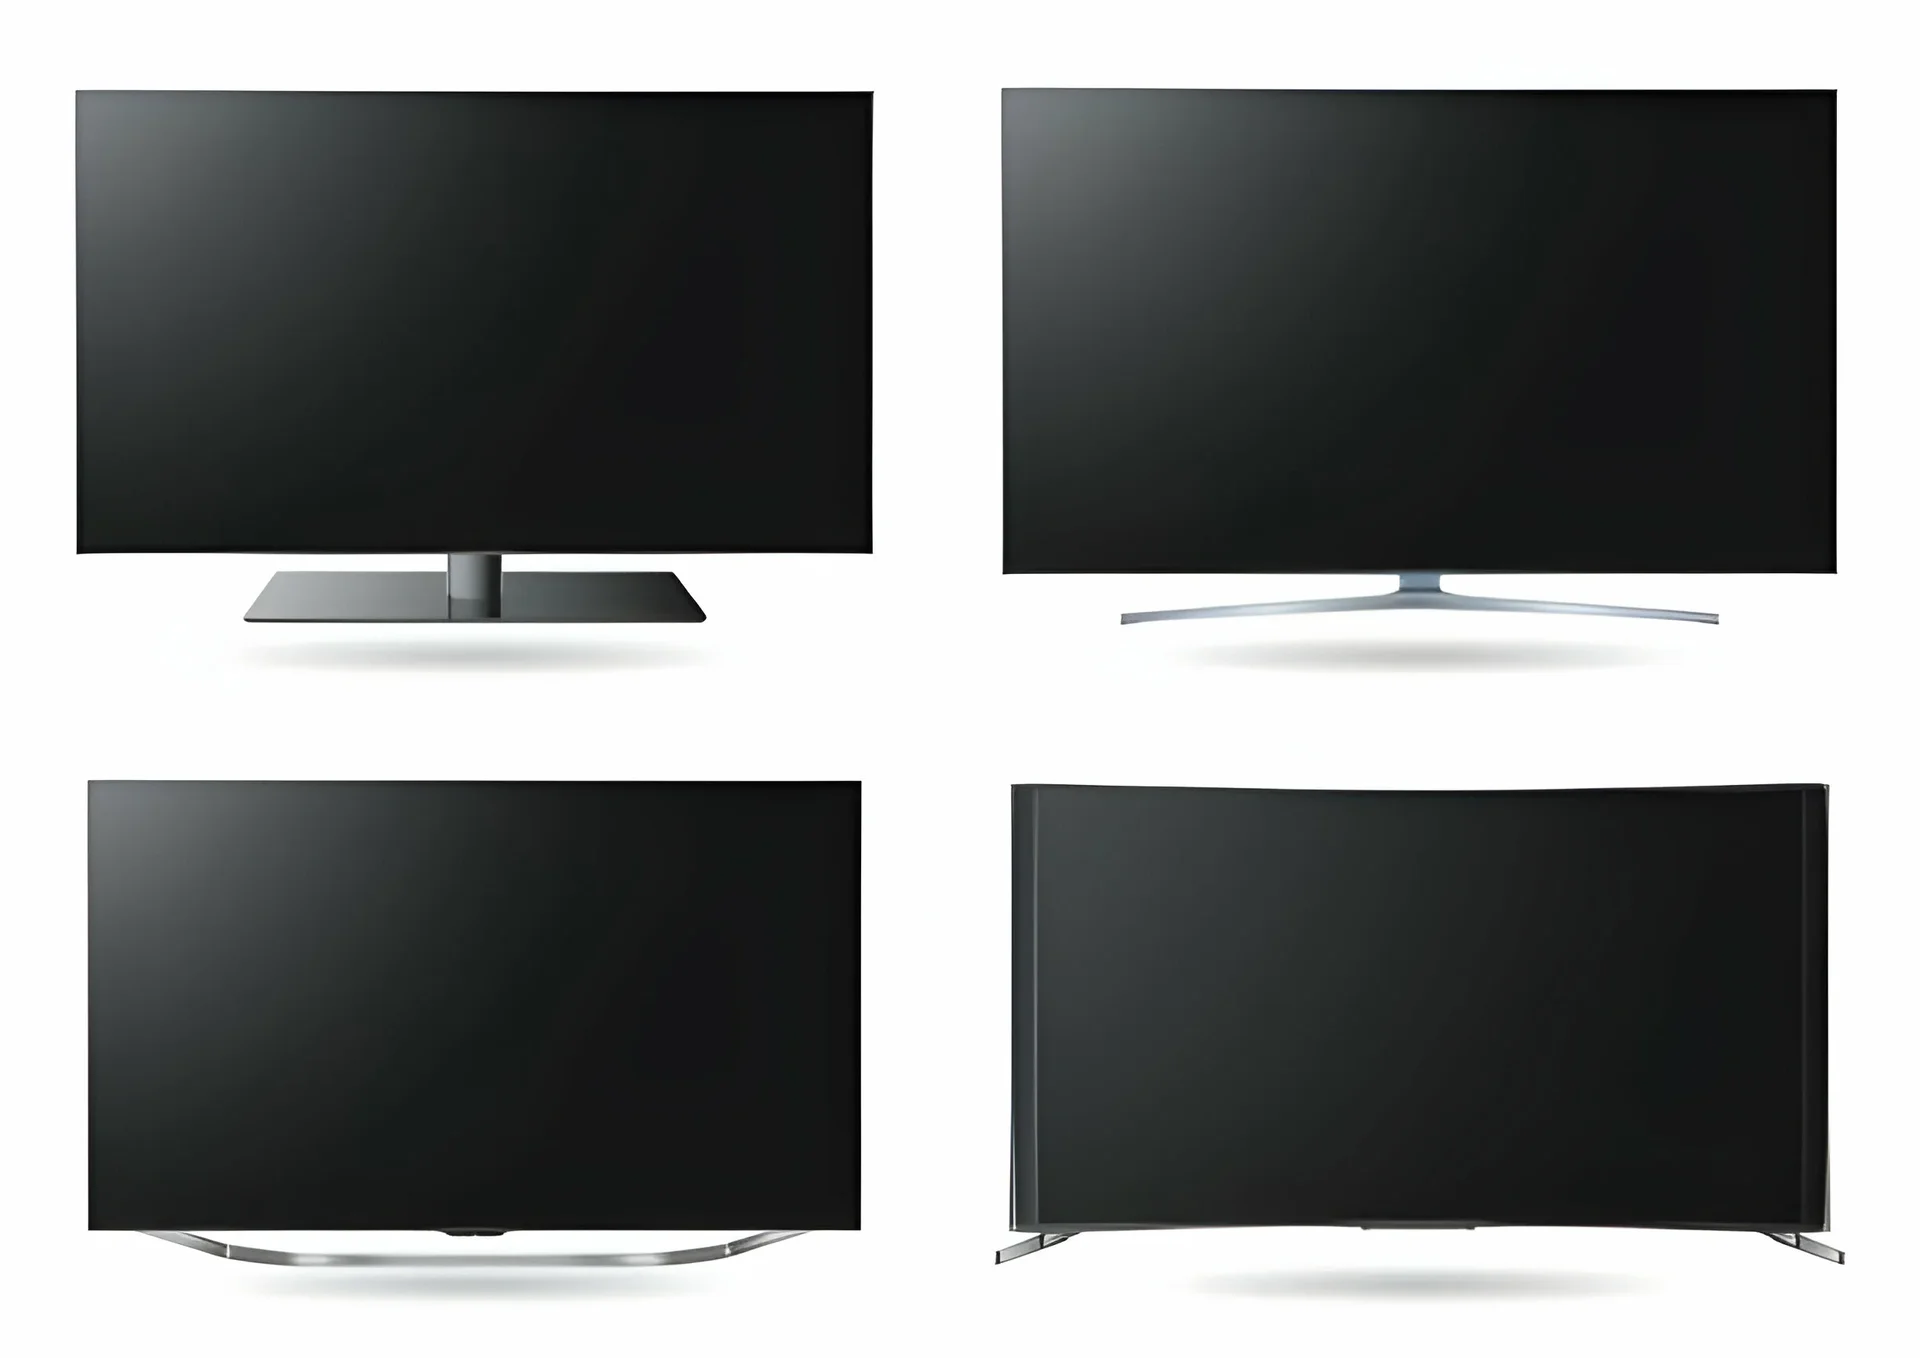 LCD or LED: which is better?